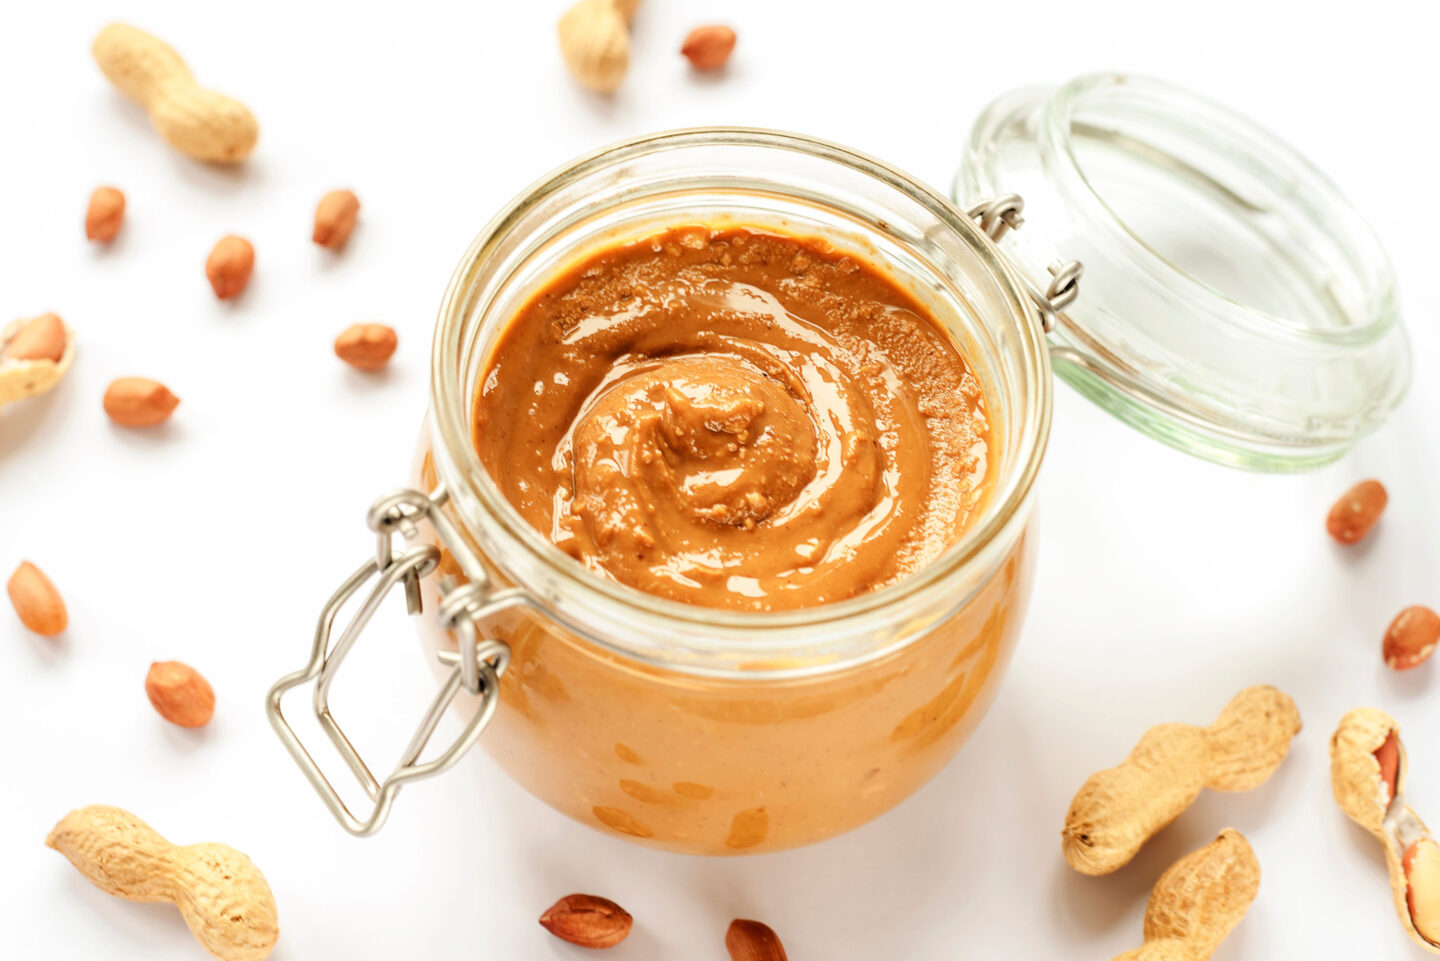 peanut butter in a jar and scattered peanuts